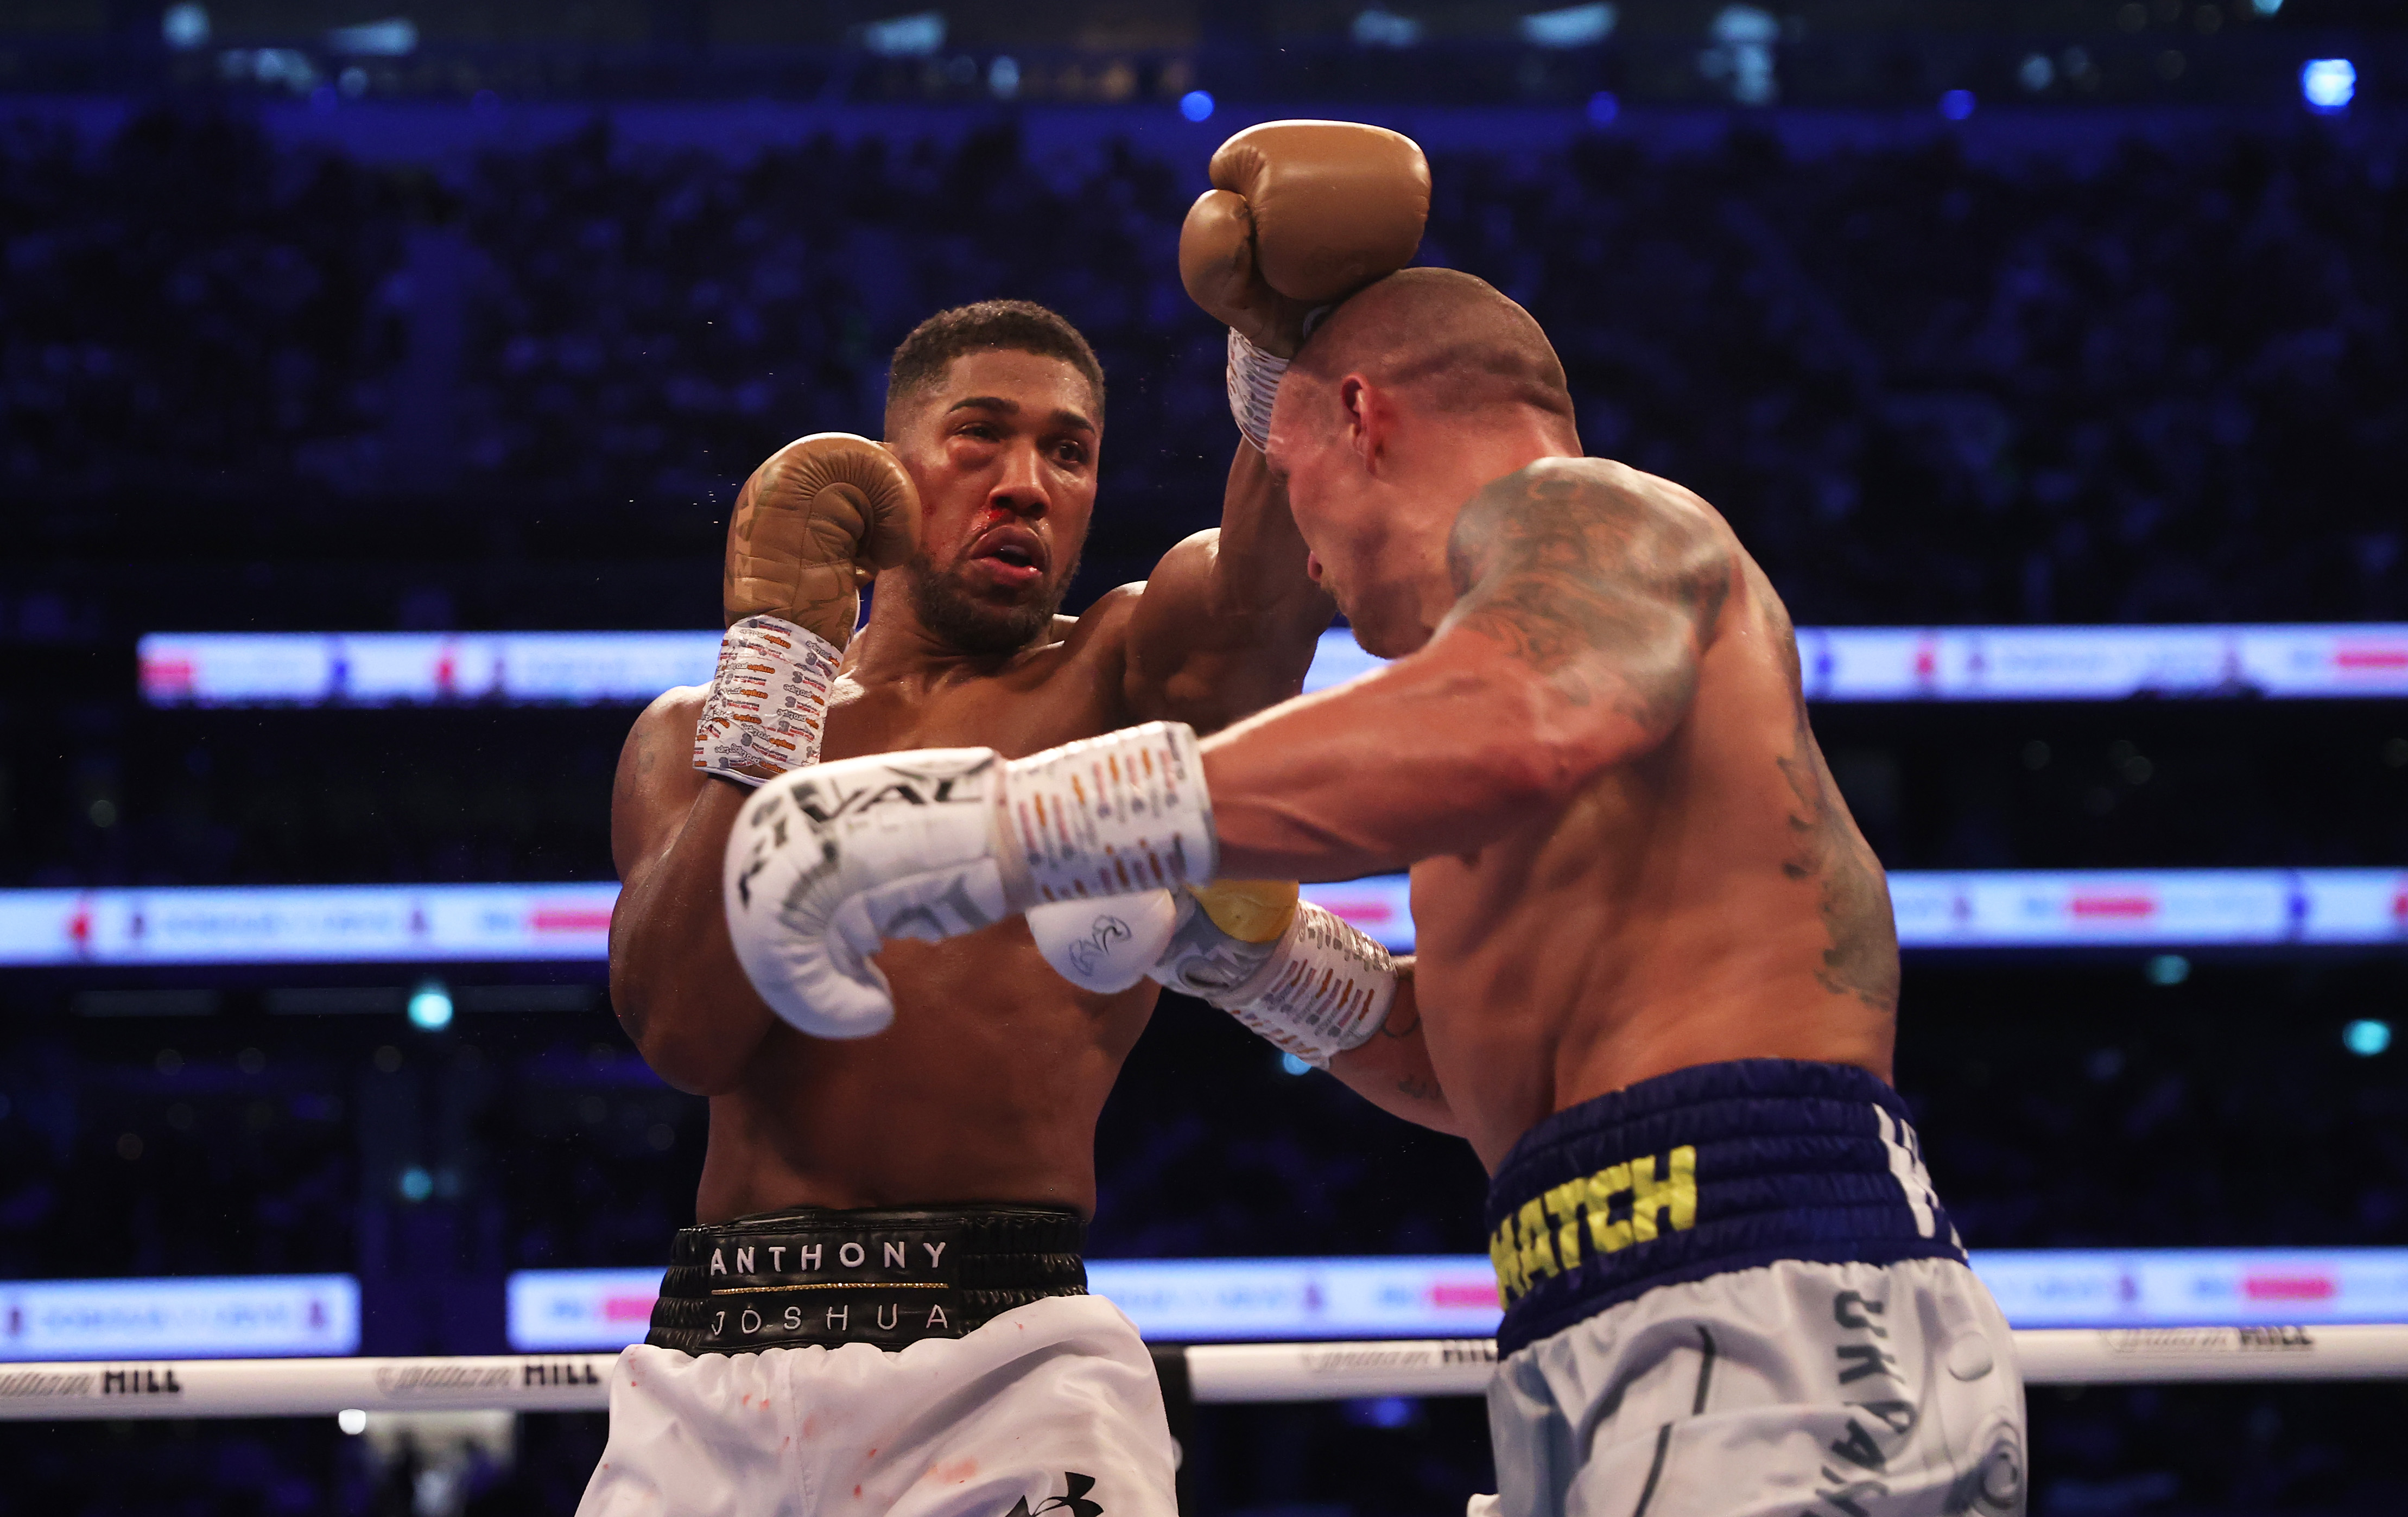 Anthony Joshua sees his rematch with Oleksandr Usyk as a big opportunity for him to reclaim his status in boxing